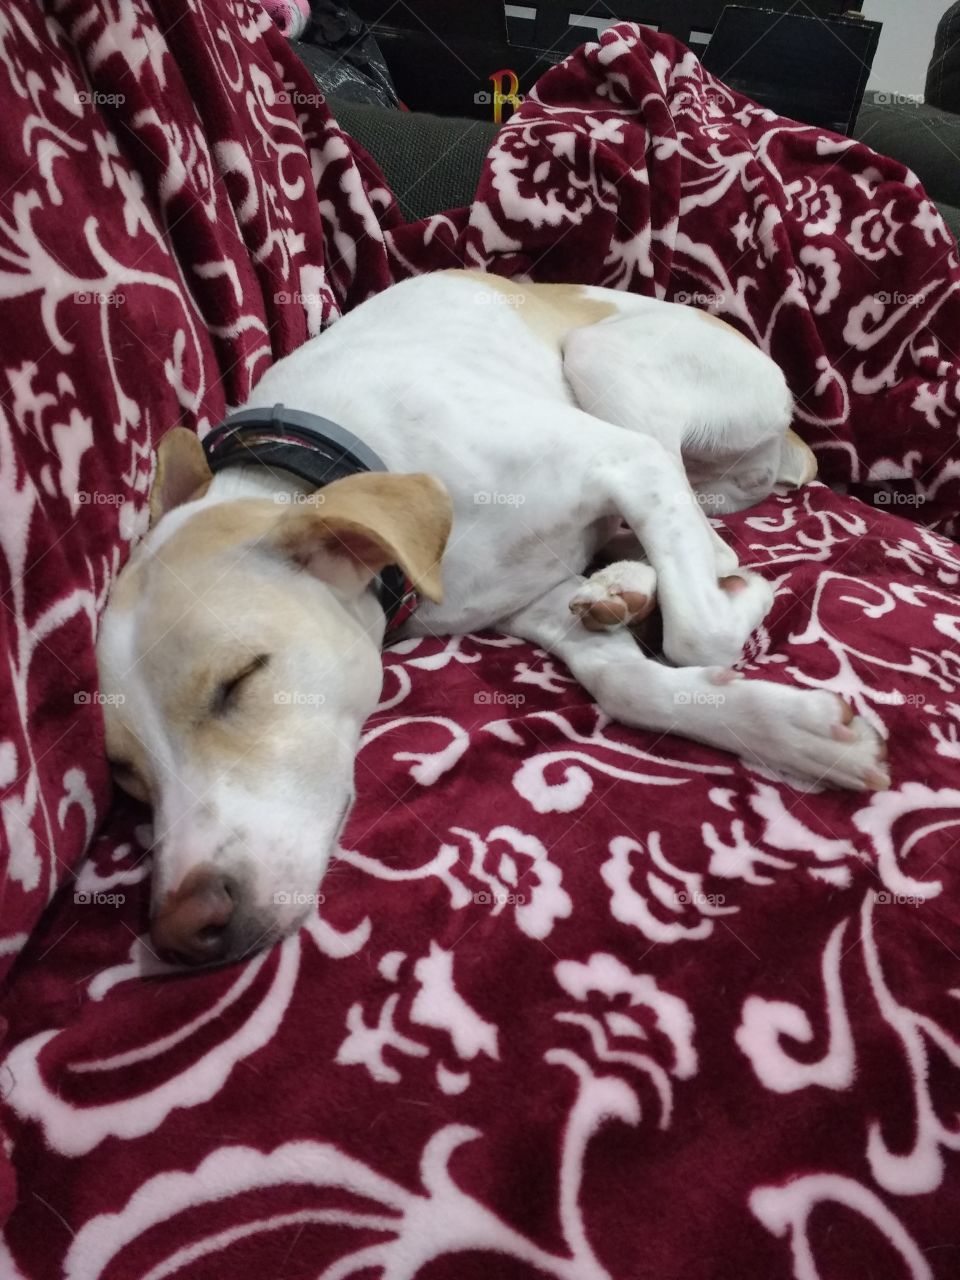 puppy sleeping on a red and white blanket